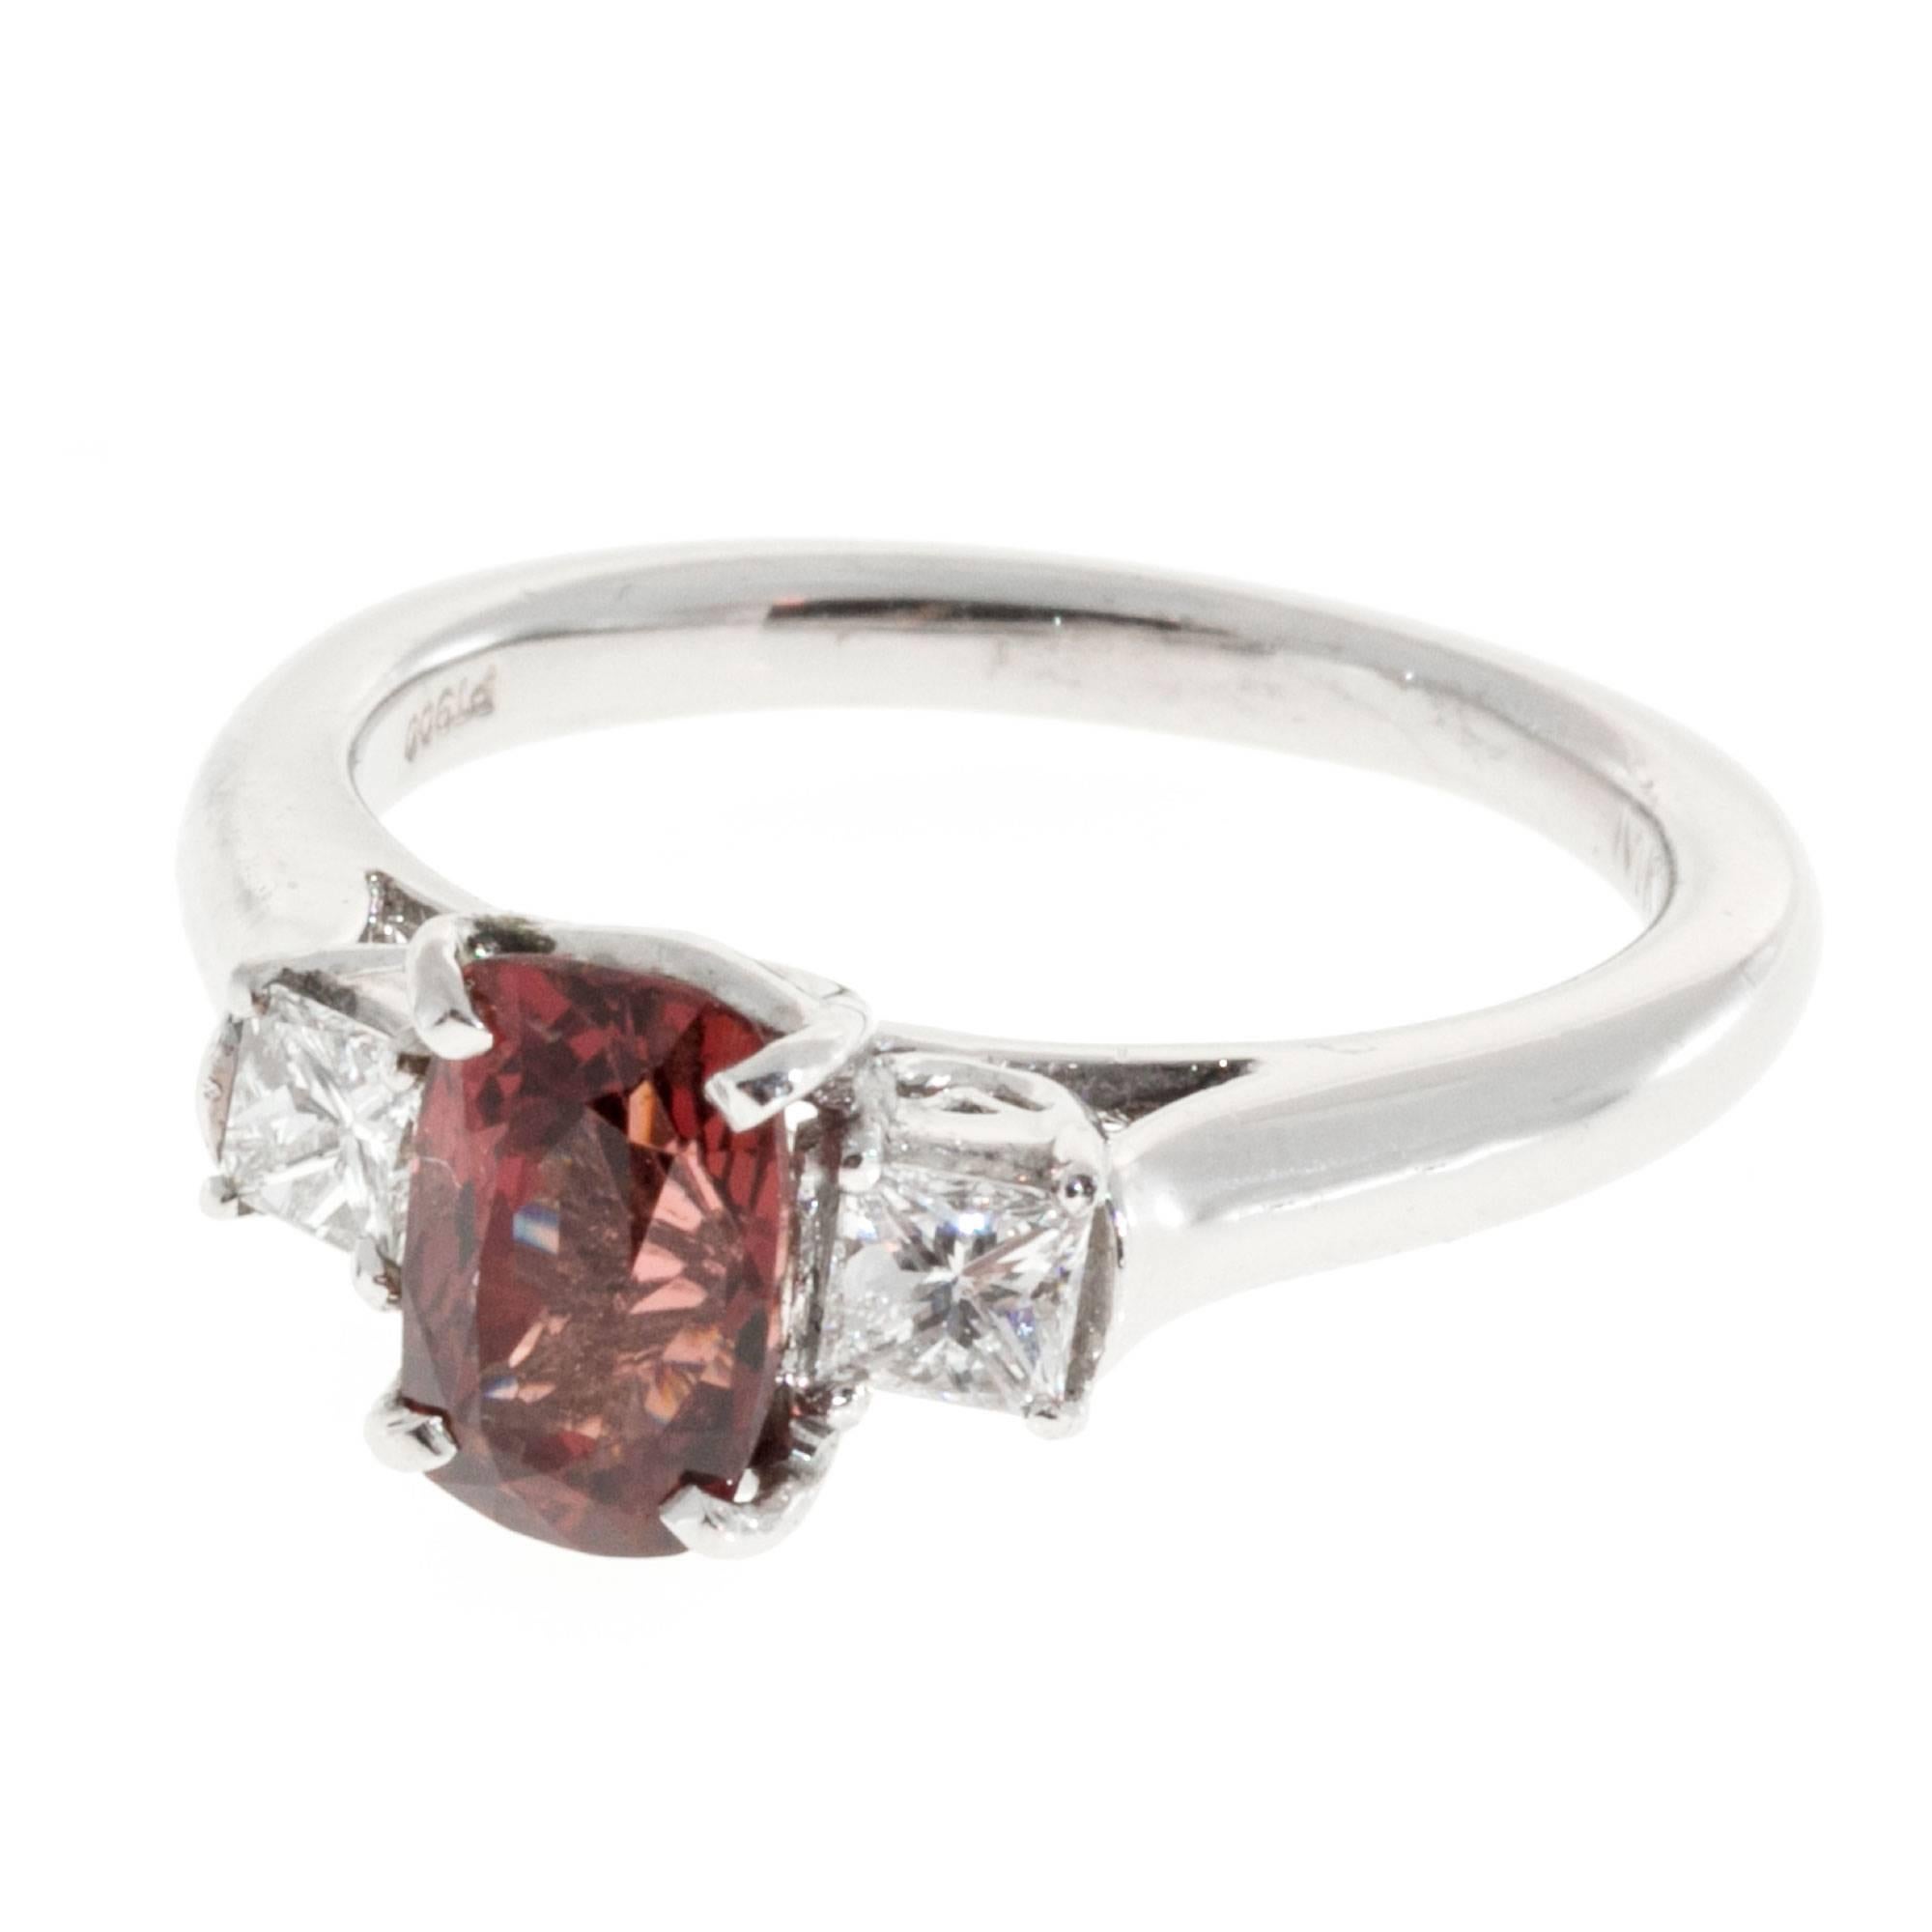 Red natural untreated Spinel and diamond three-stone engagement ring. Elongated spinel with two princess cut side diamonds in a platinum setting.

1 cushion cut natural orange red Spinel, approx. total weight 1.37cts, SI1, 7.67 x 4.98 x 4.30mm, GIA